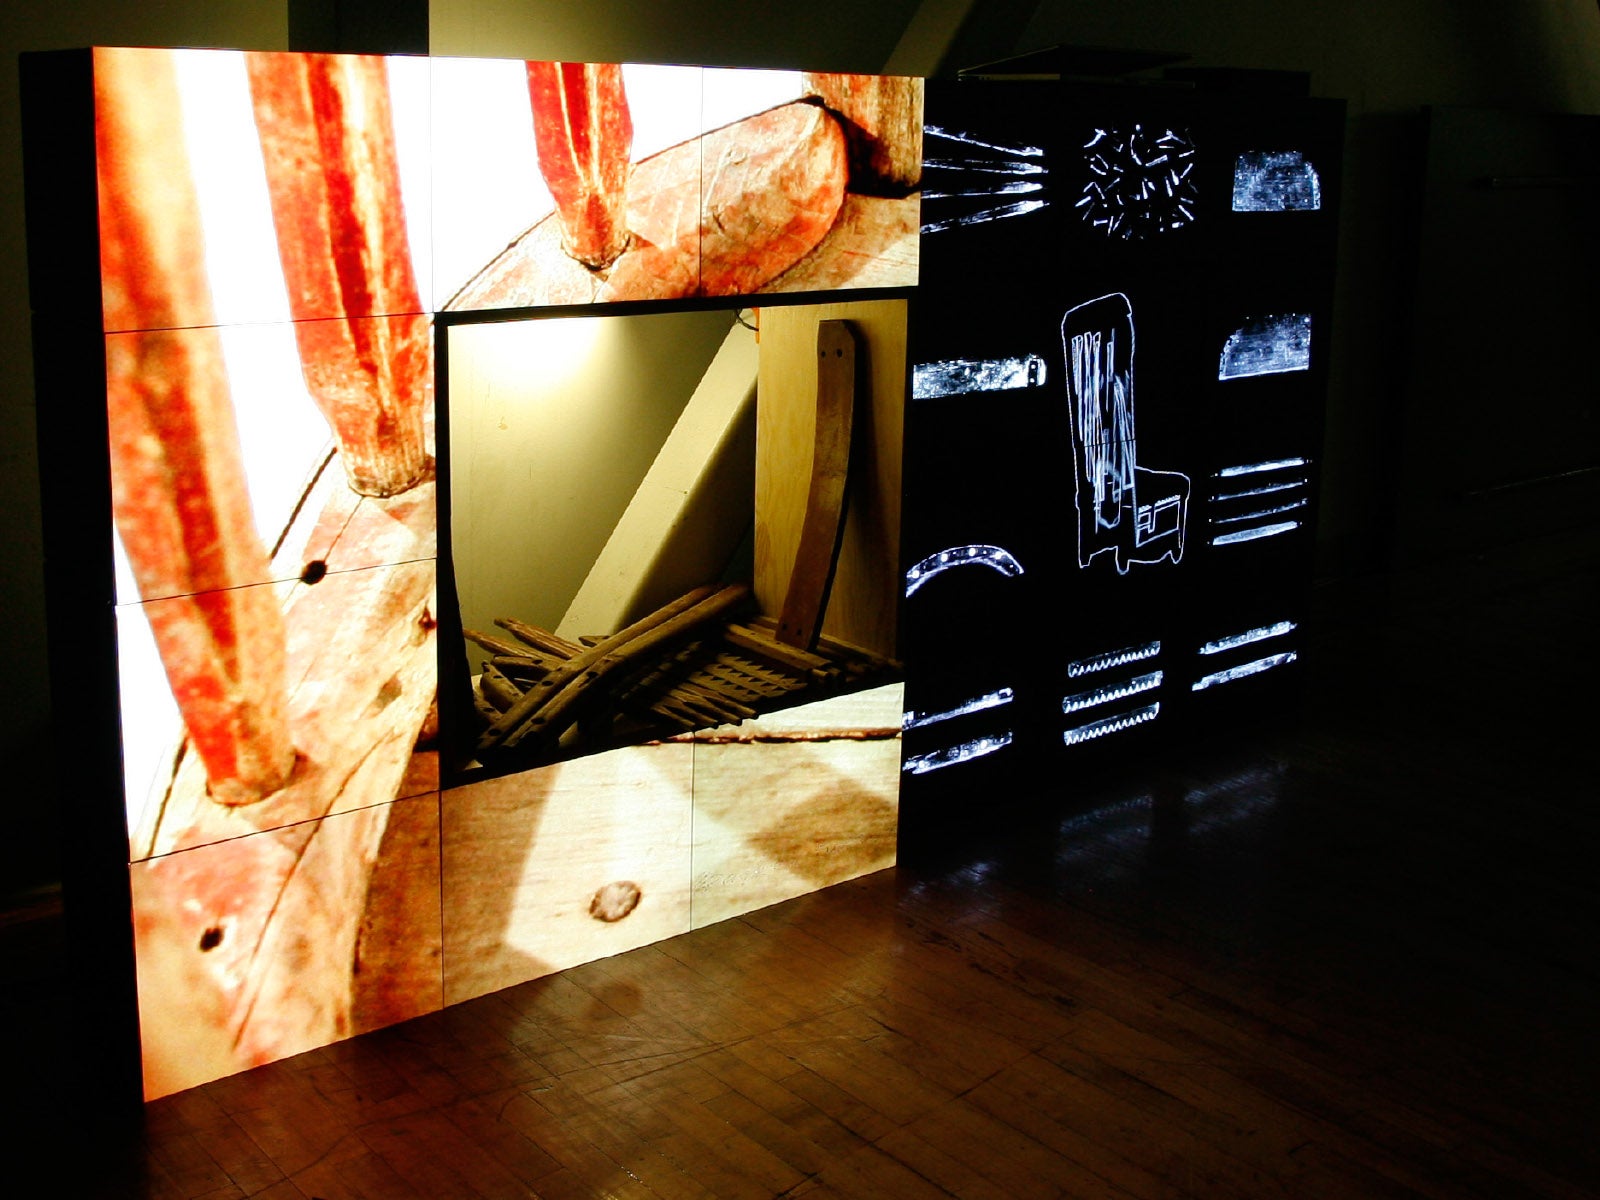 A photograph of some sort of interactive screen constructed with an array of display panels, displaying several abstract forms.